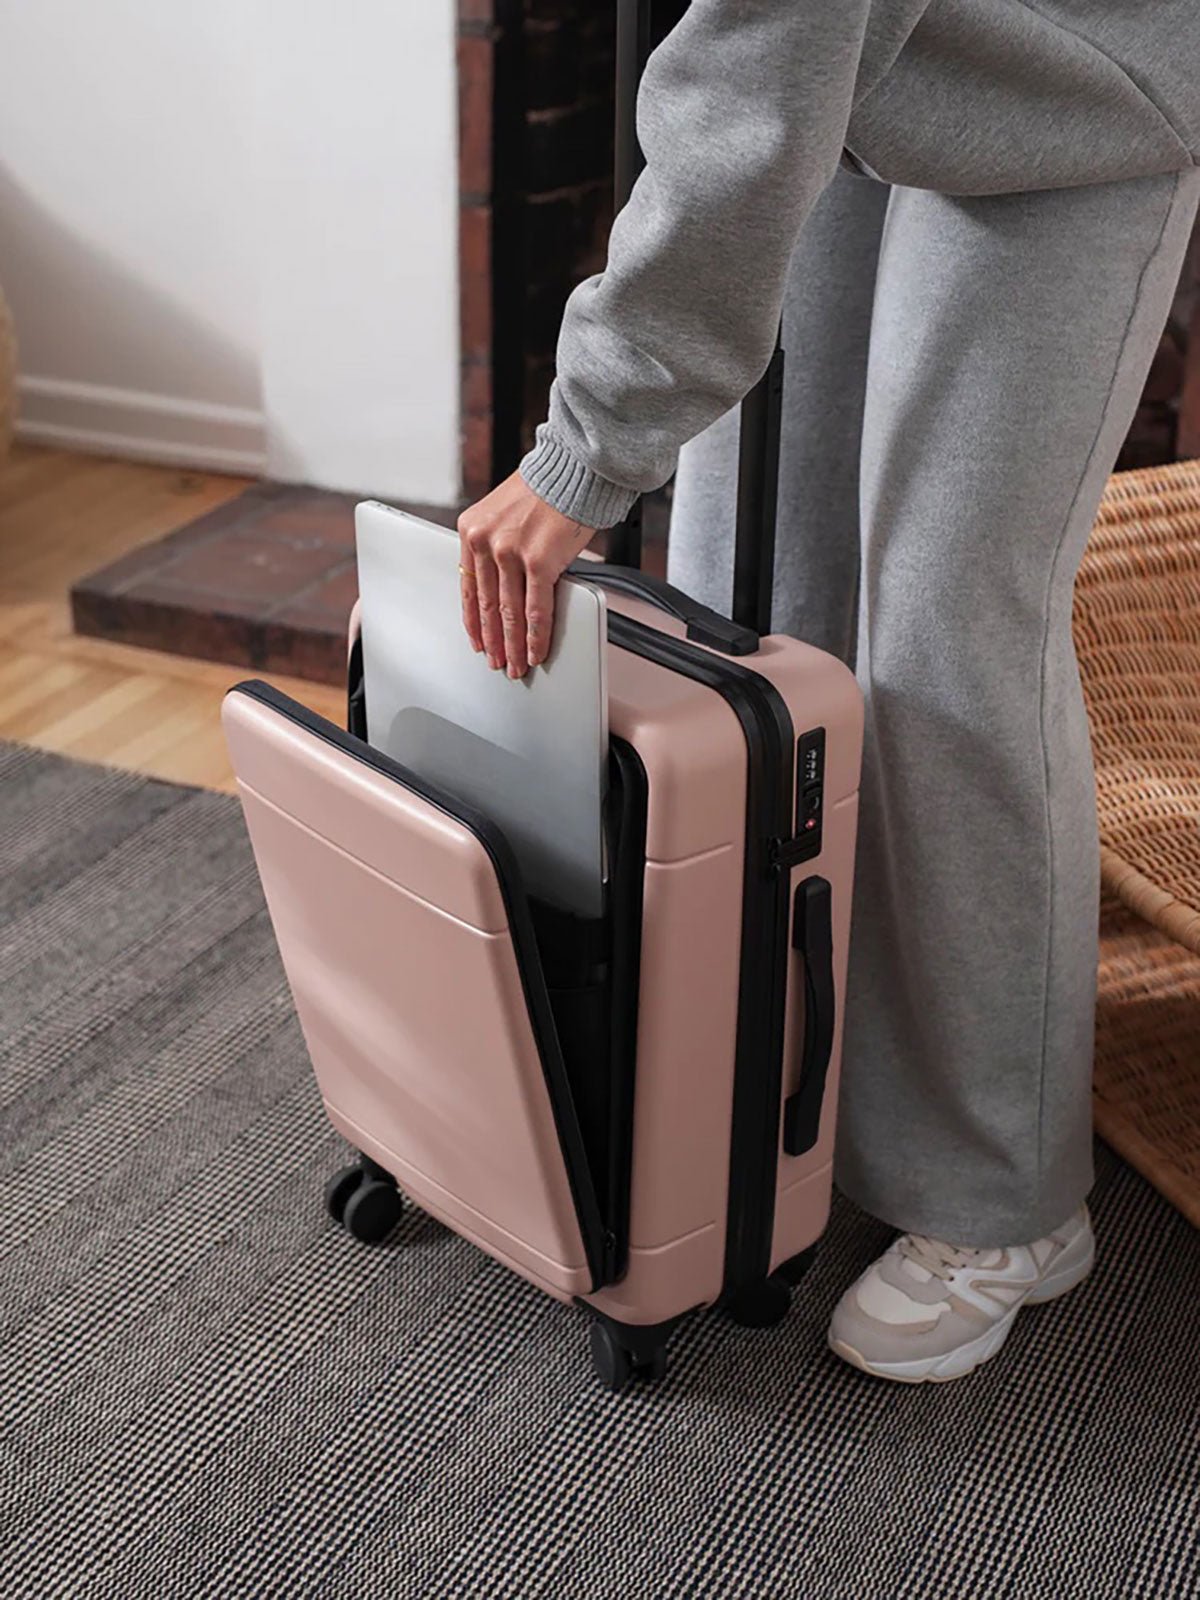 CALPAK Hue lightweight polycarbonate carry-on suitcase with laptop pocket in pink sand color